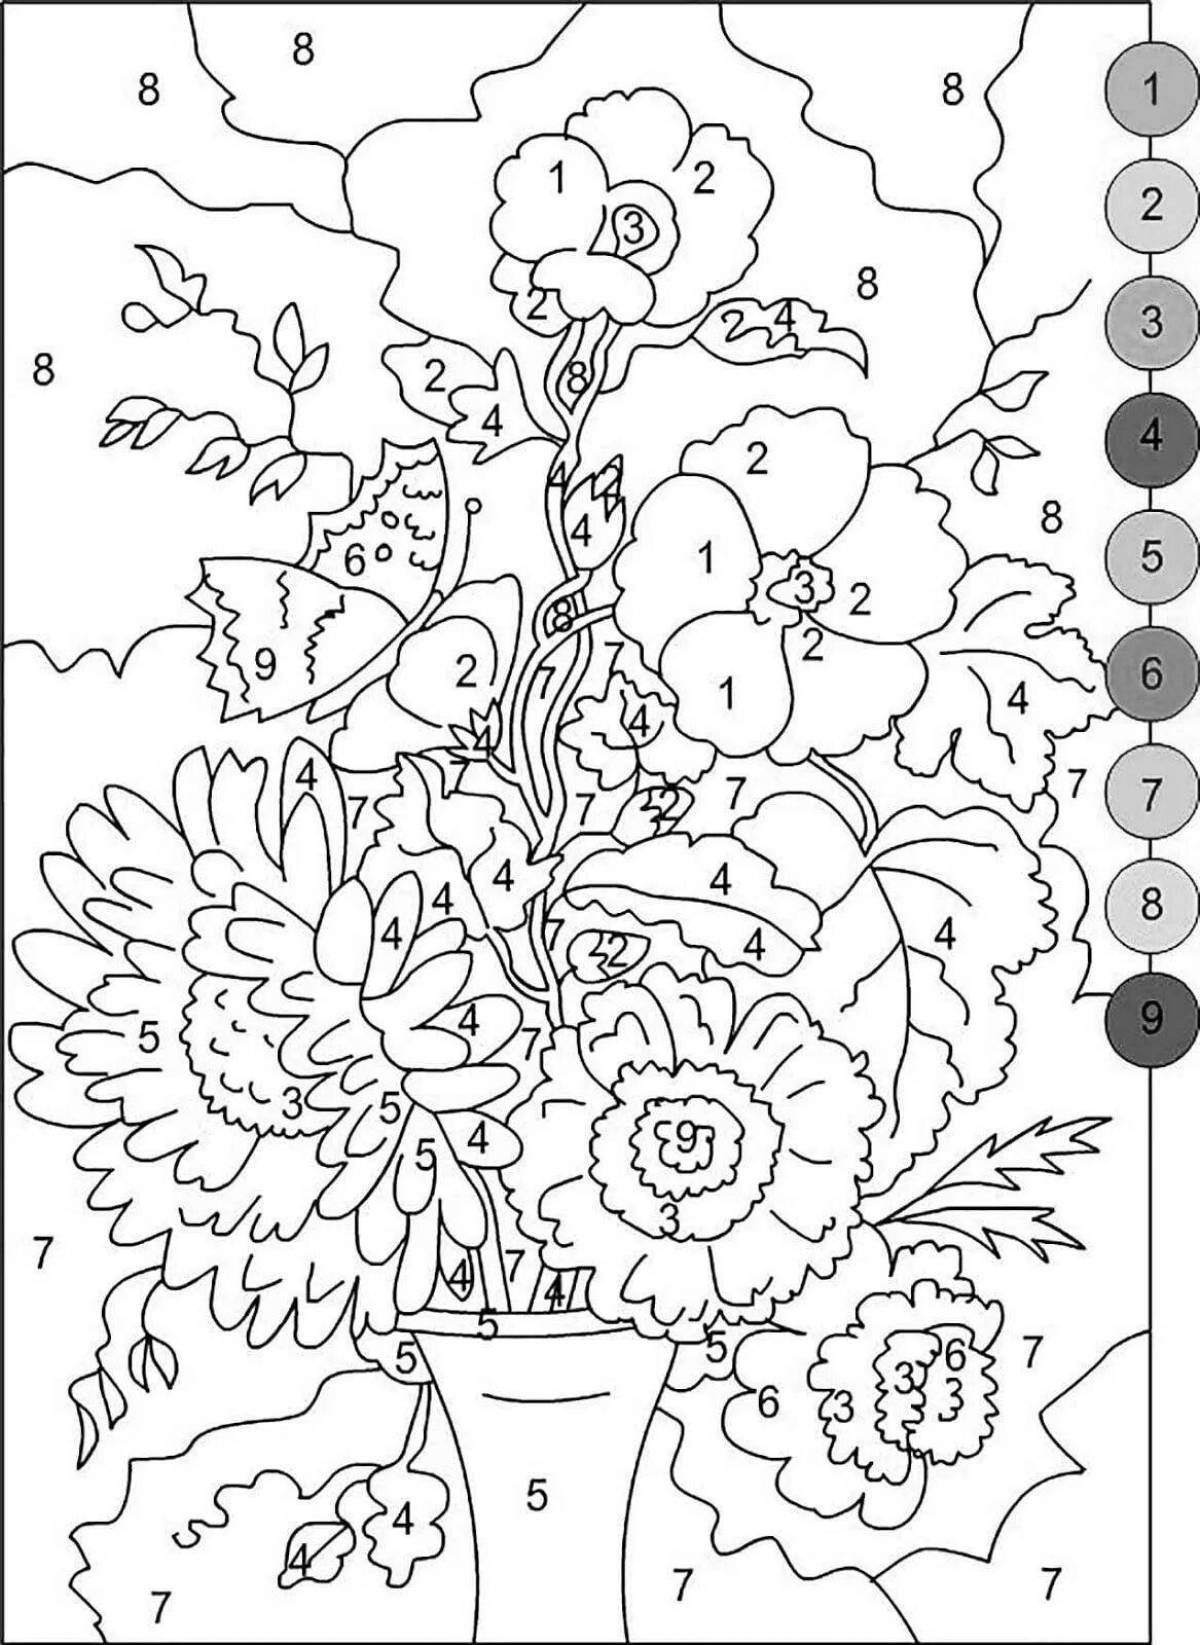 Color fun set by numbers coloring page